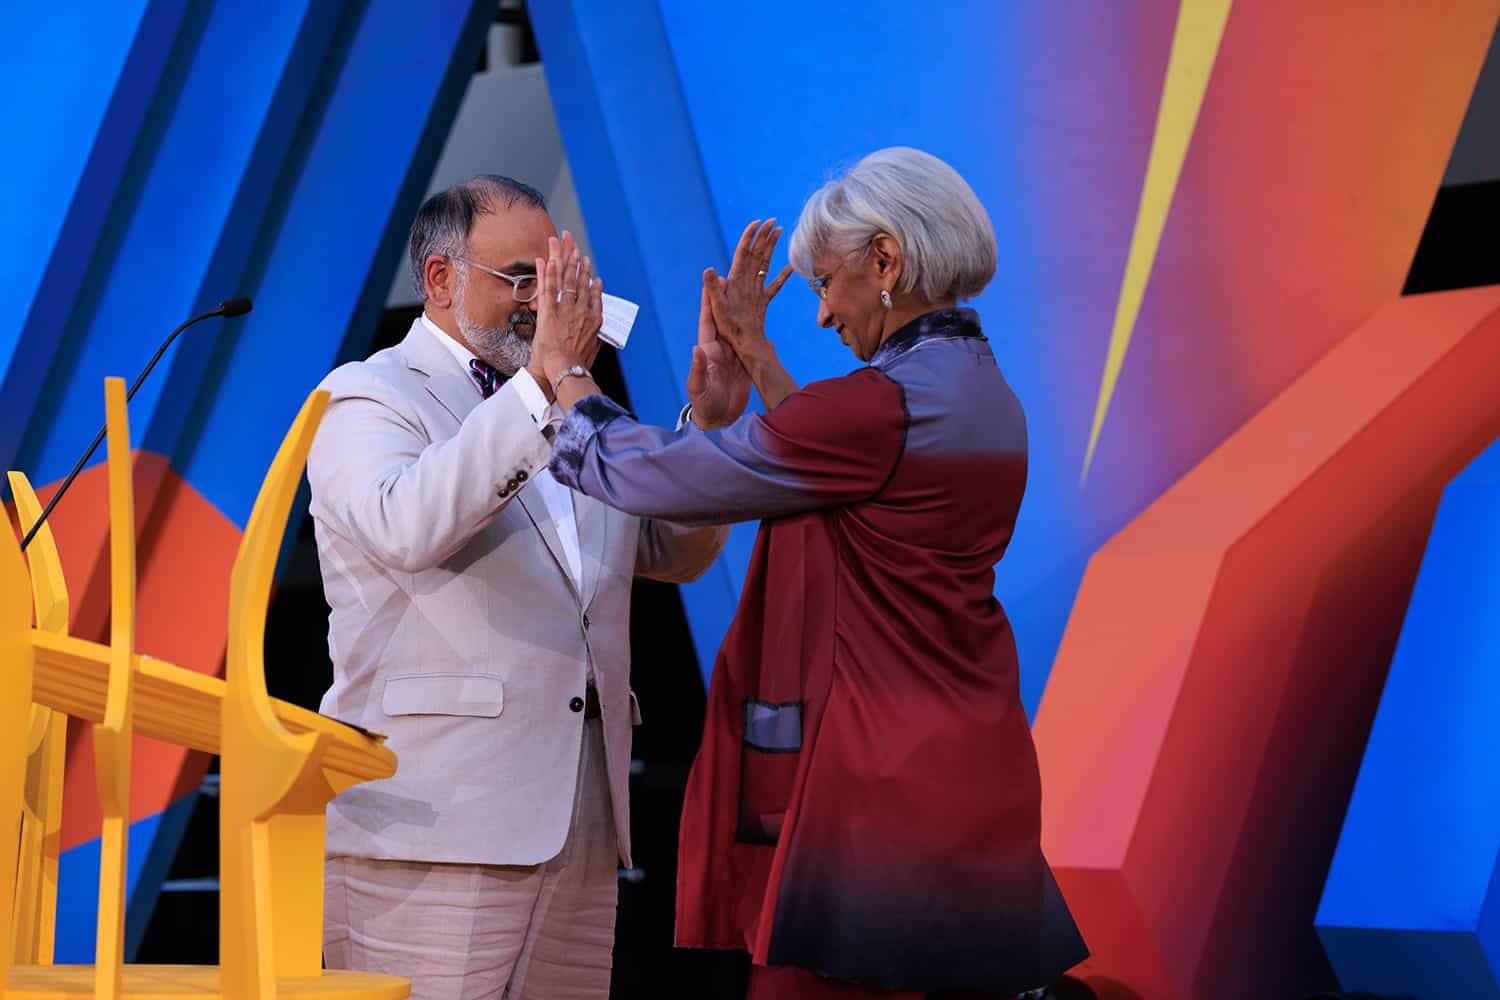 The president and new trustee share a double high five on the colorful graduation stage.